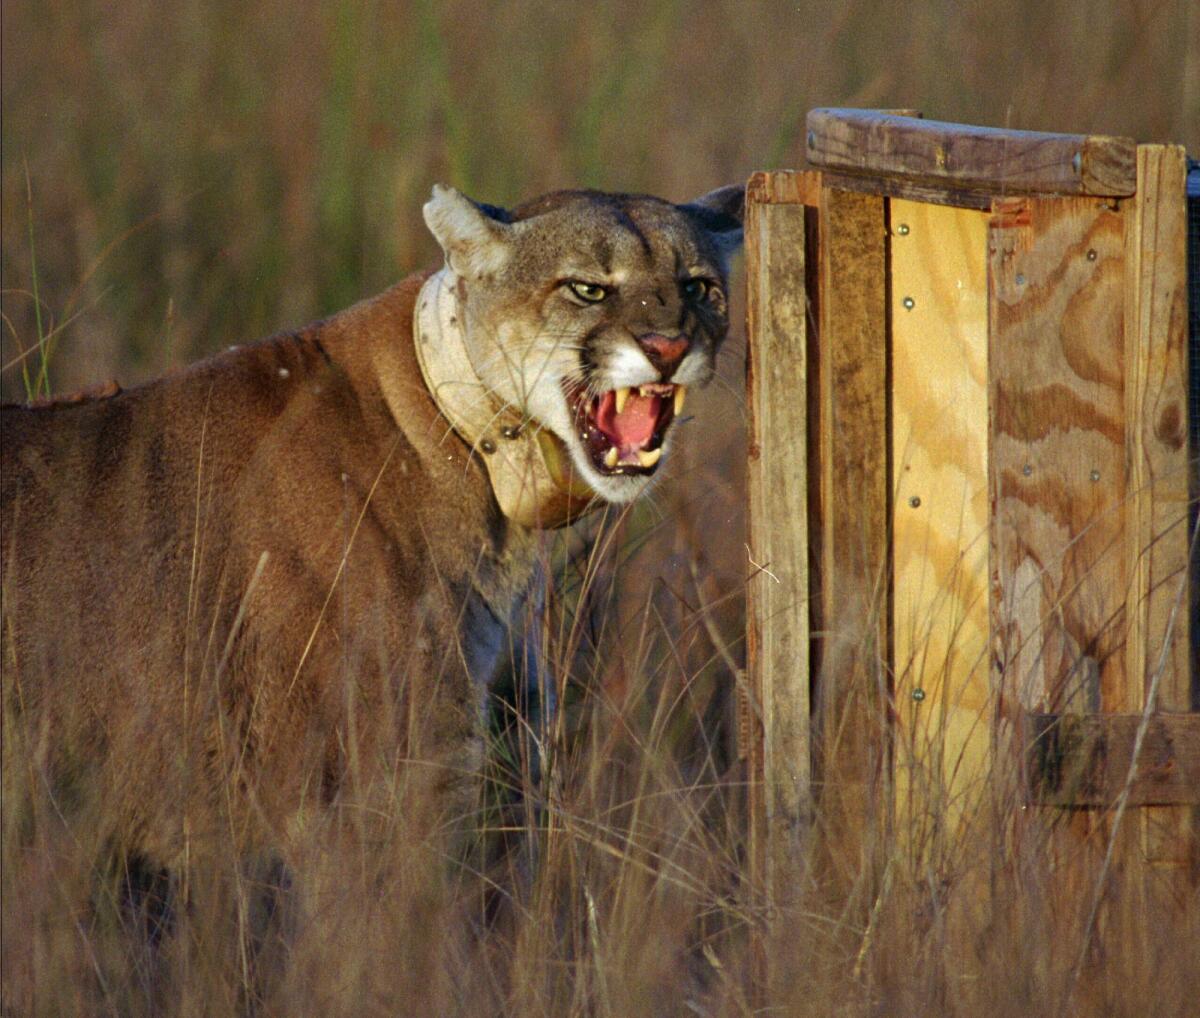 A Florida panther snarls as he leaves his shipping container to enter his new home at Big Cypress National Preserve, Fla., in January 1997. A University of Florida study has found that as the panther population has rebounded, ranchers are losing more cattle to attacks.